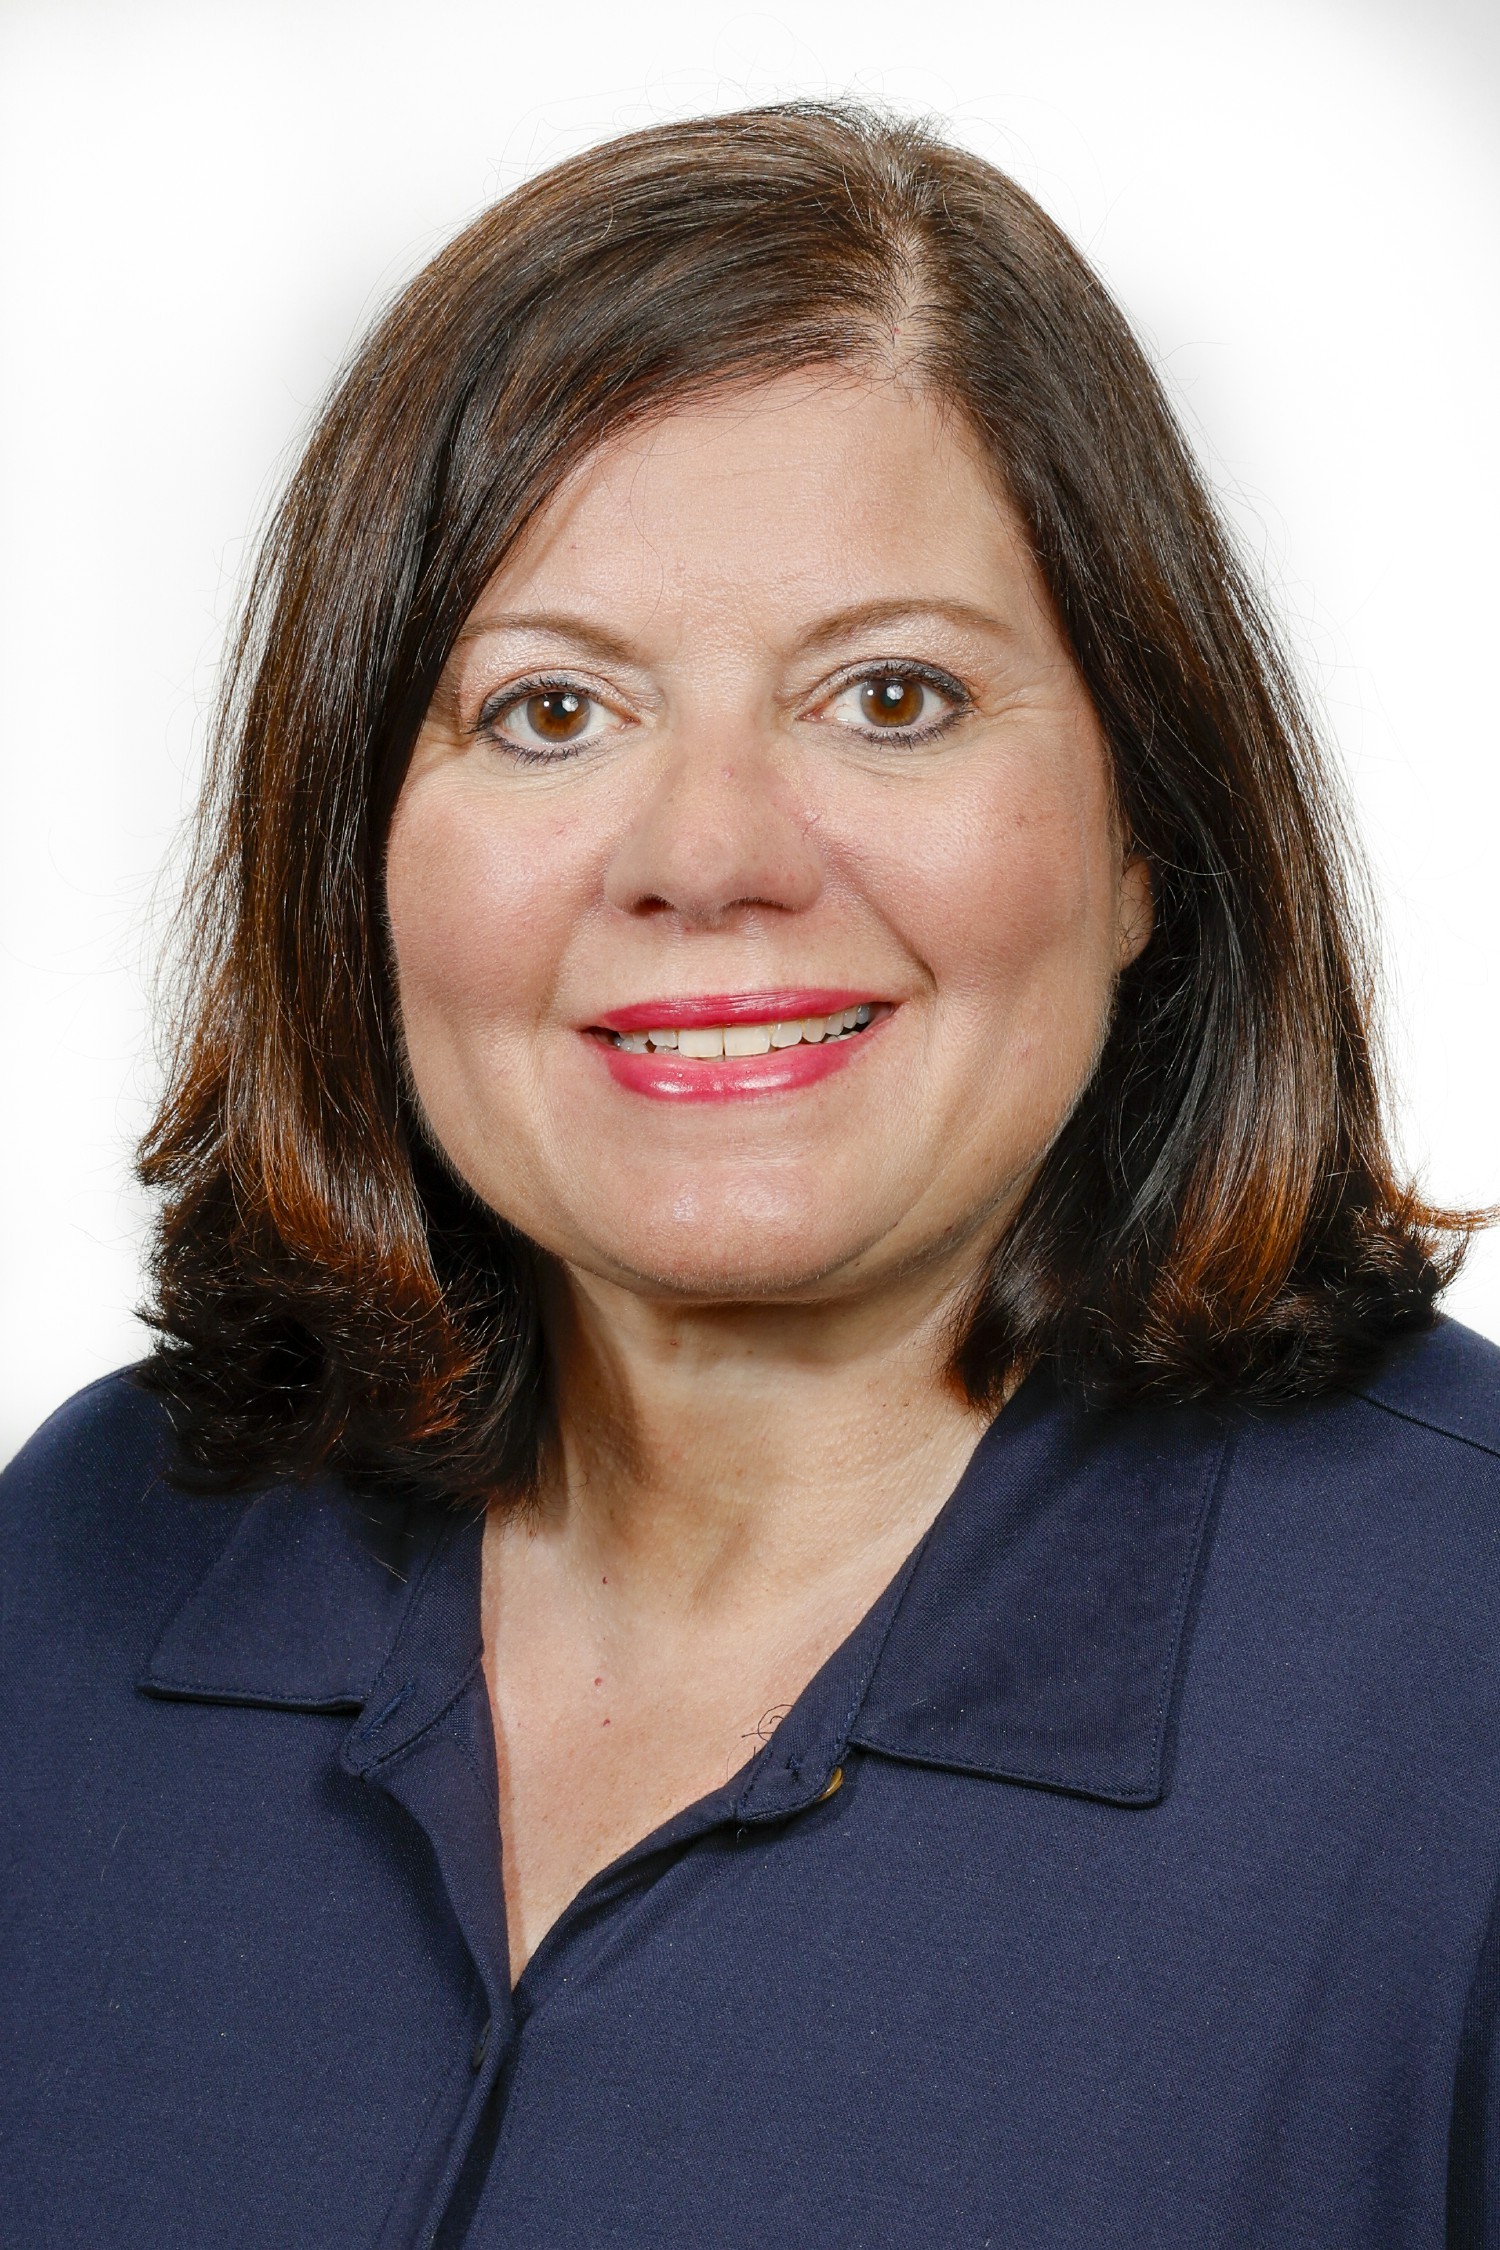 Bethpage Federal Credit Union President and CEO, Linda Armyn